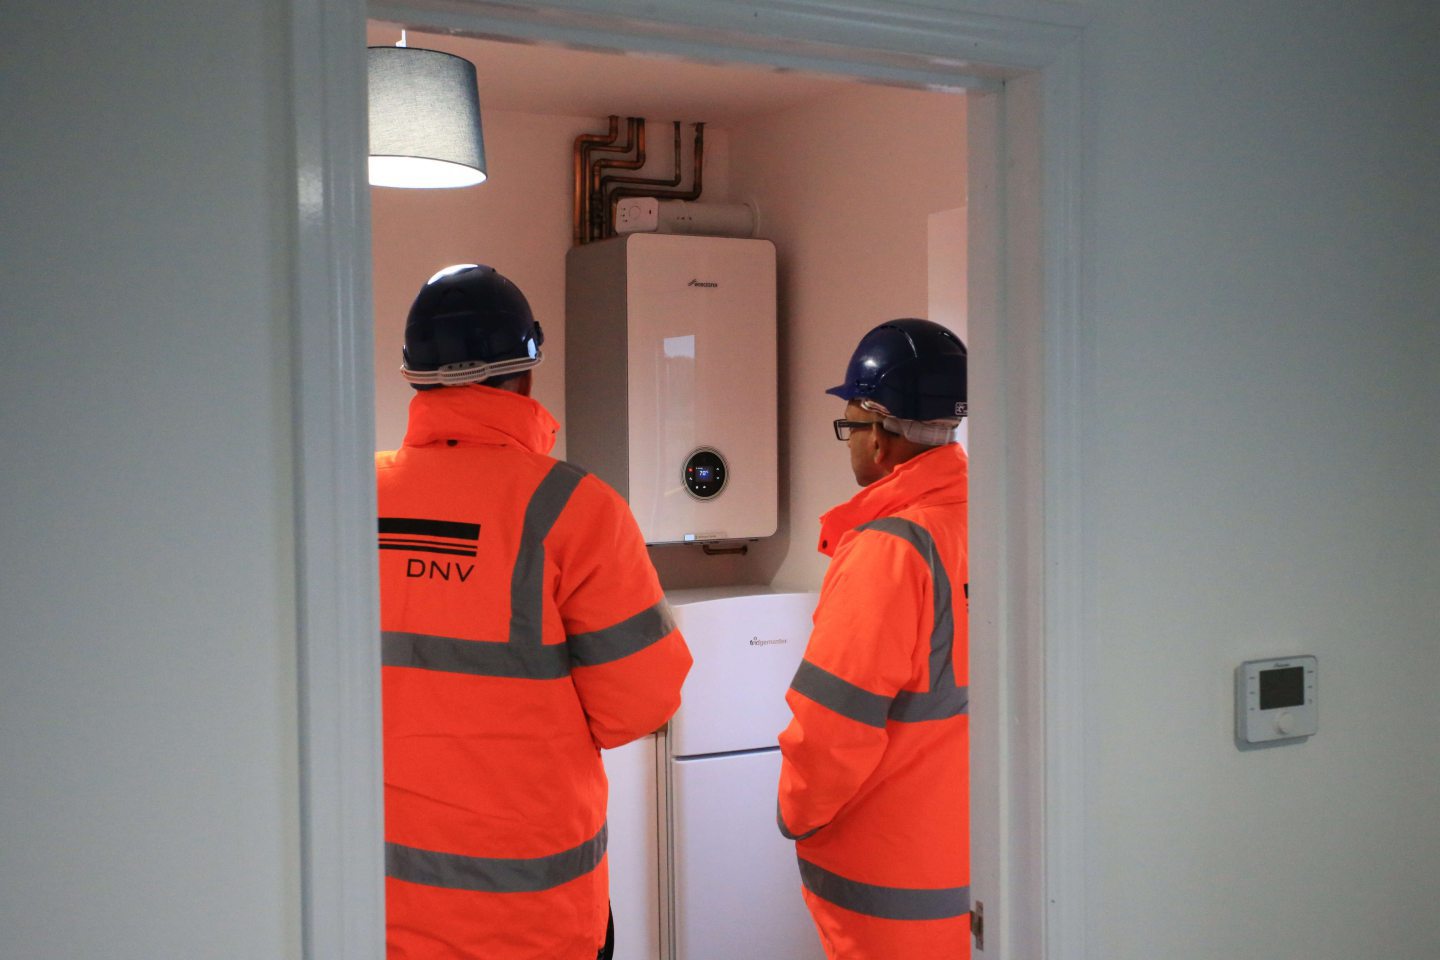 Further doubts on hydrogen home heating as town pilot delayed